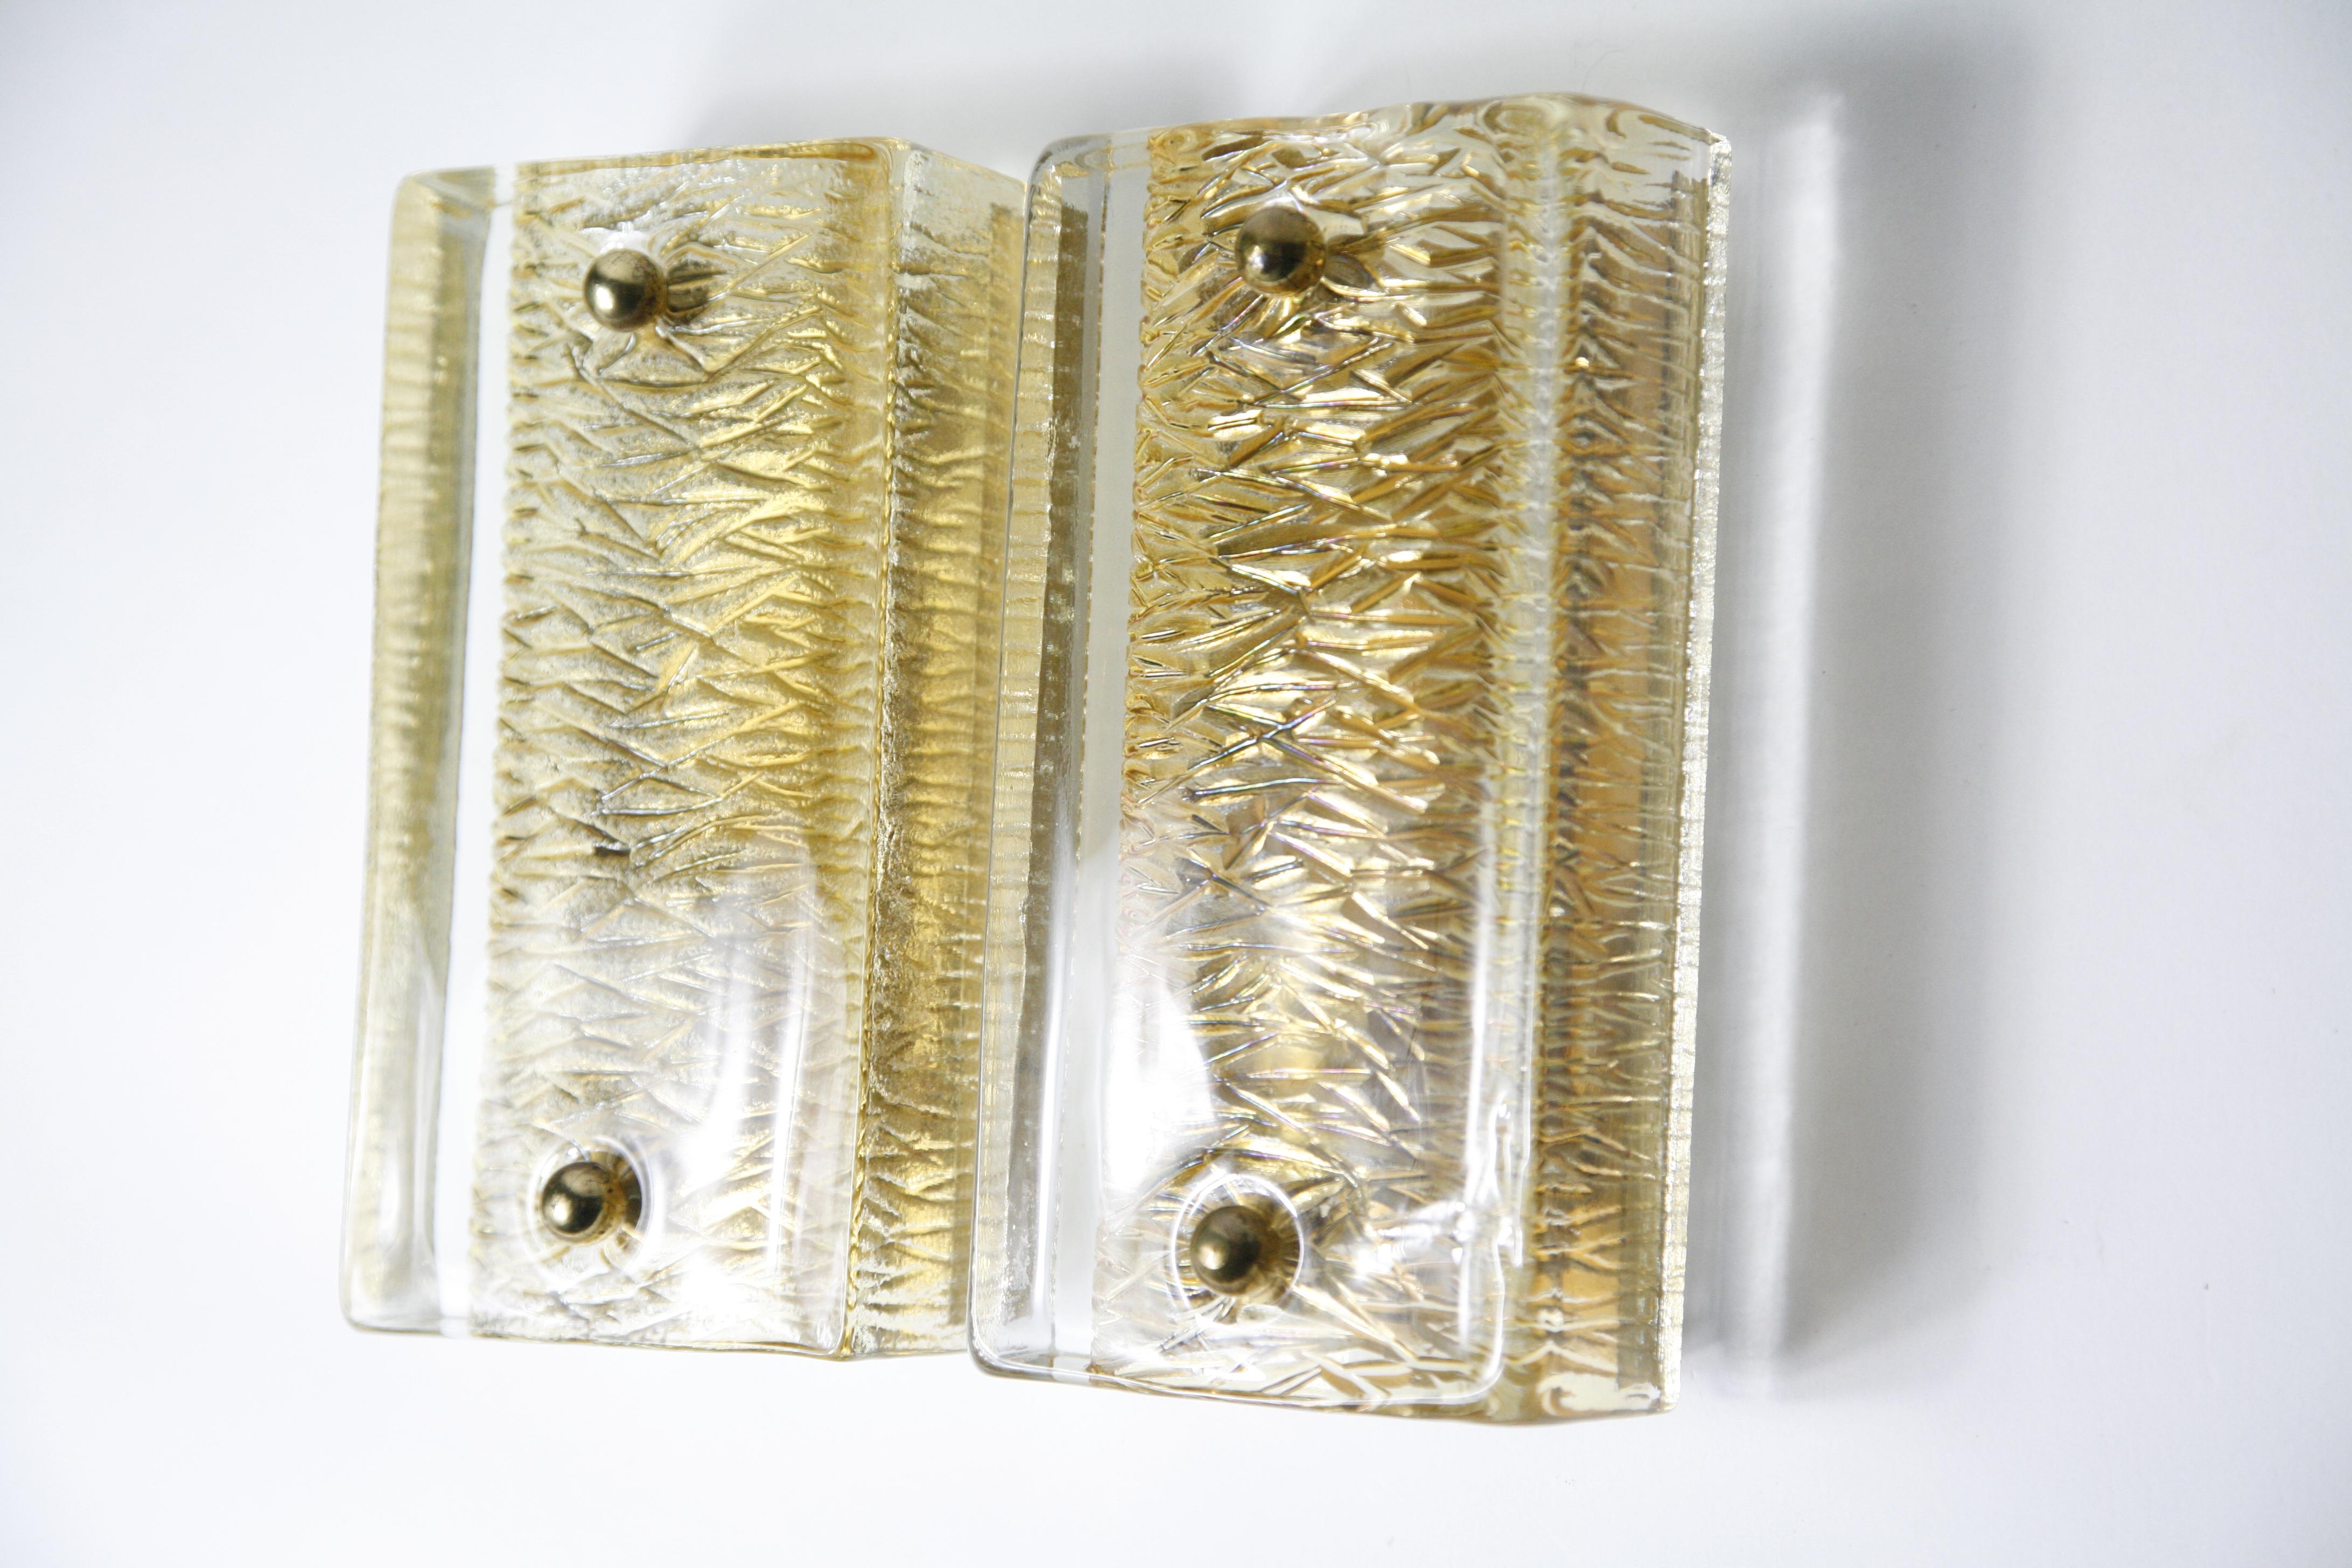 Hand-Crafted Pair of Orrefors Sconces Brass and Crystal Glass Shades by Orrefors Sweden, 1970